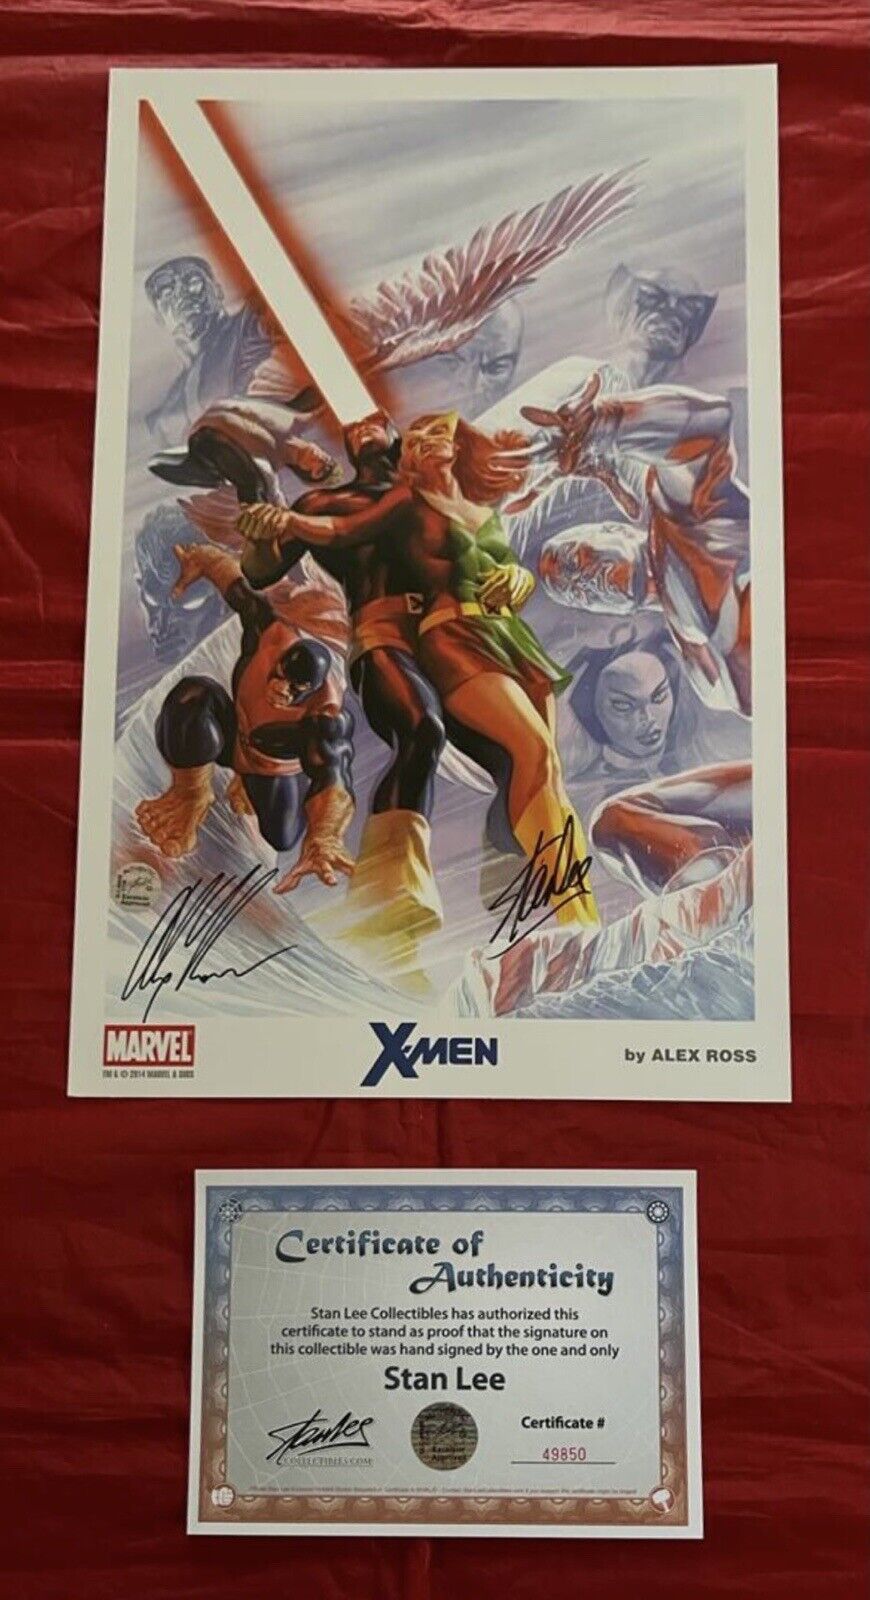 X-Men Alex Ross Print Signed by Stan Lee with COA & Alex Ross Only 200 Marvel